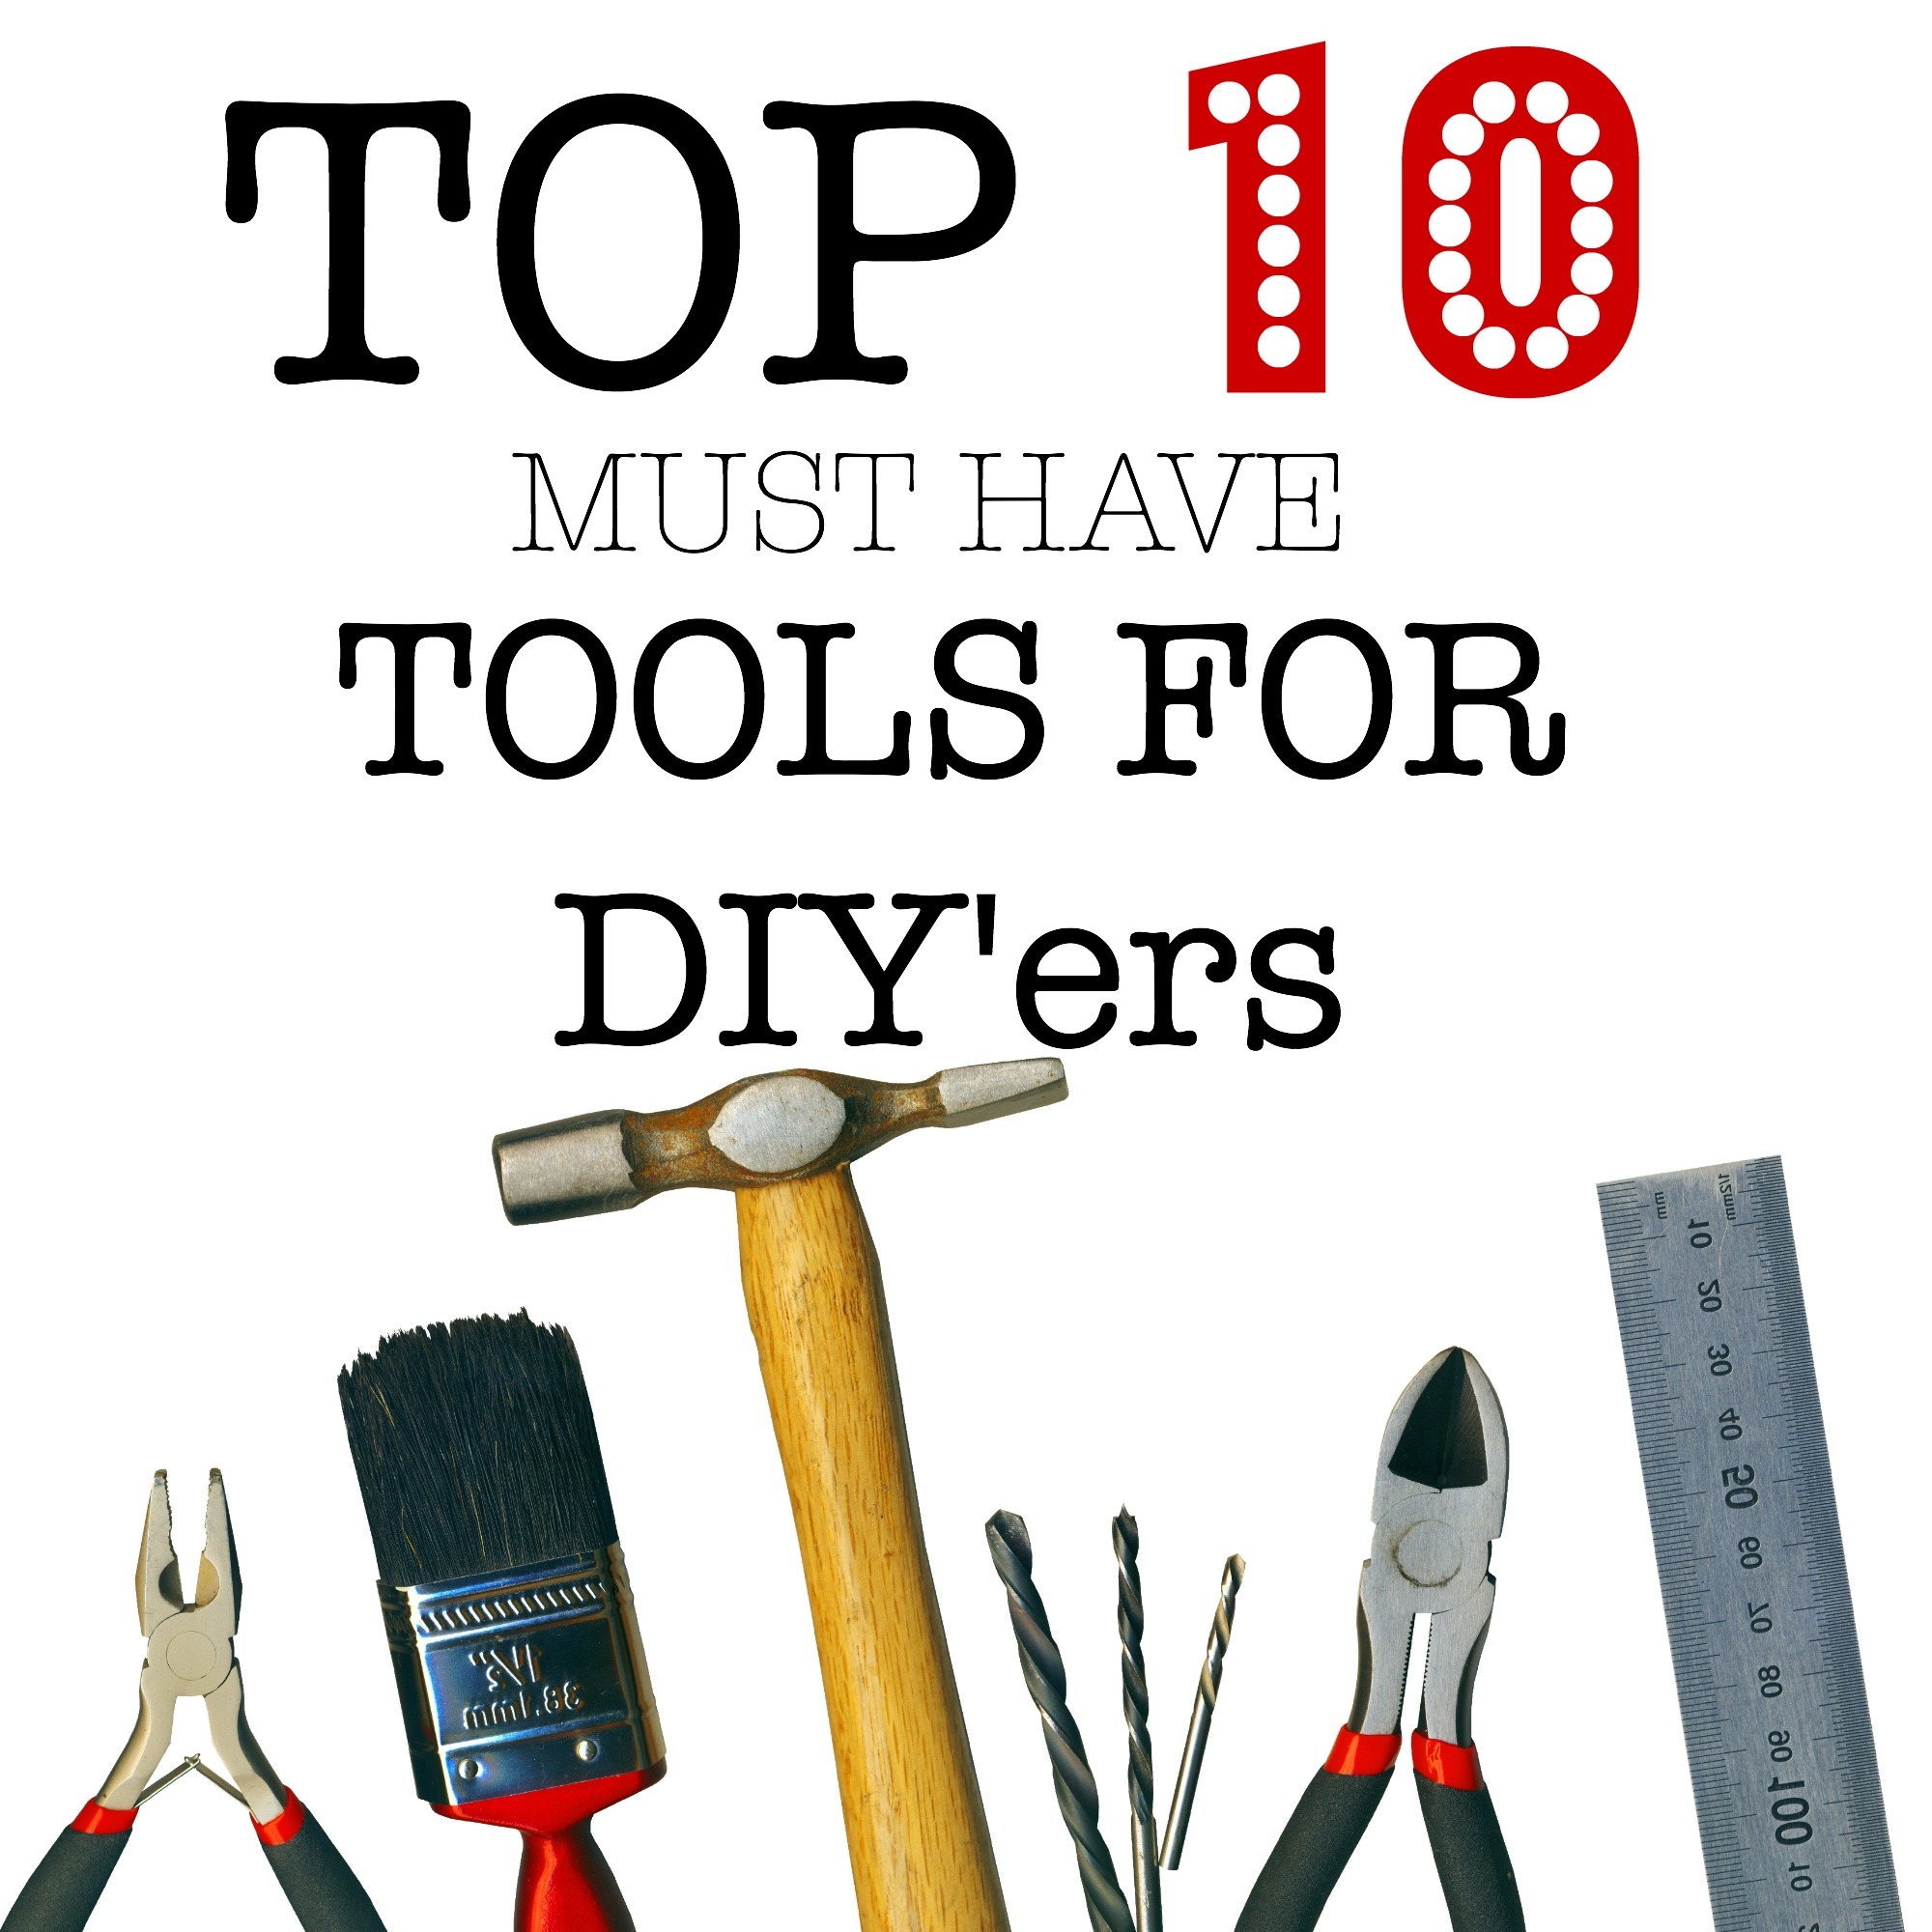 Top 10 must have tools for Diy'ers